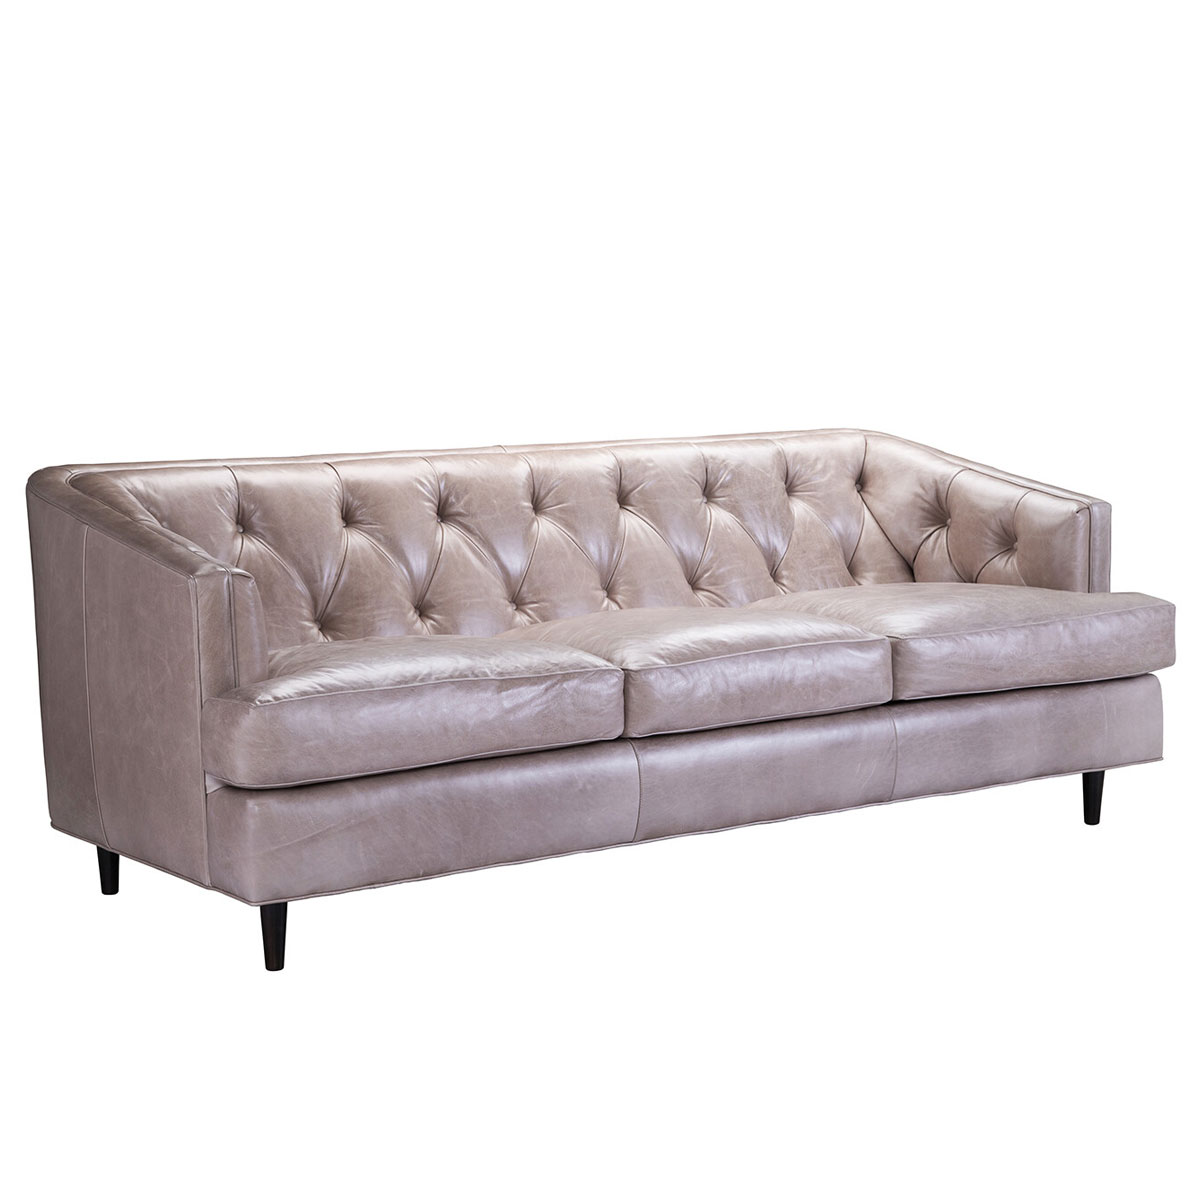 CC Leather 615 Murray Sofa shown in Mt. Blanc Mink (Grade D)